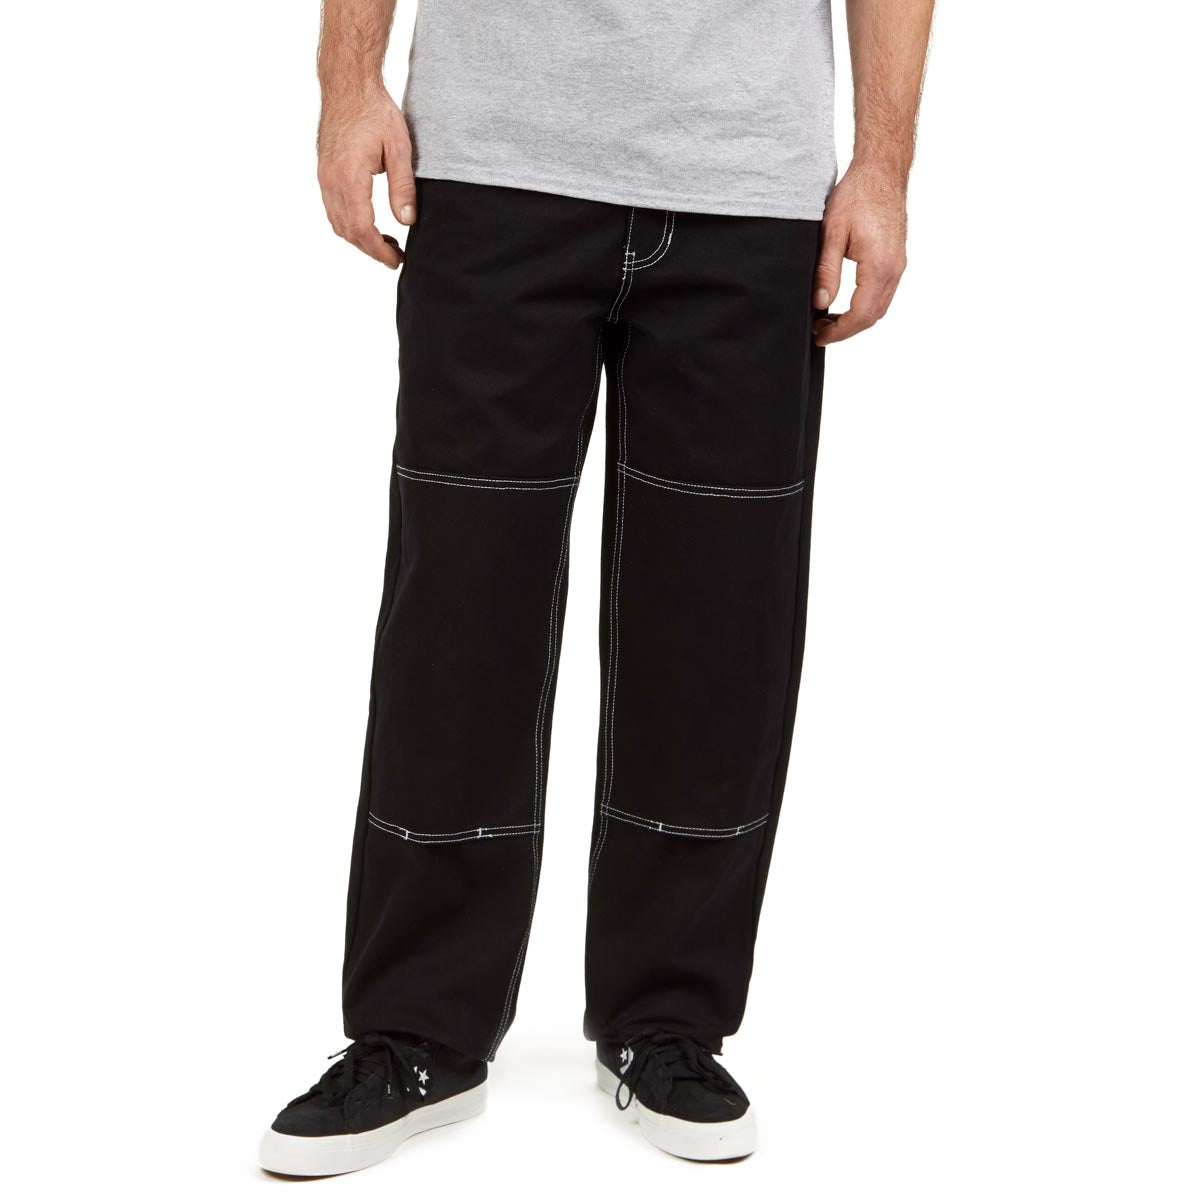 CCS Double Knee Original Relaxed Canvas Pants - Black/White image 1